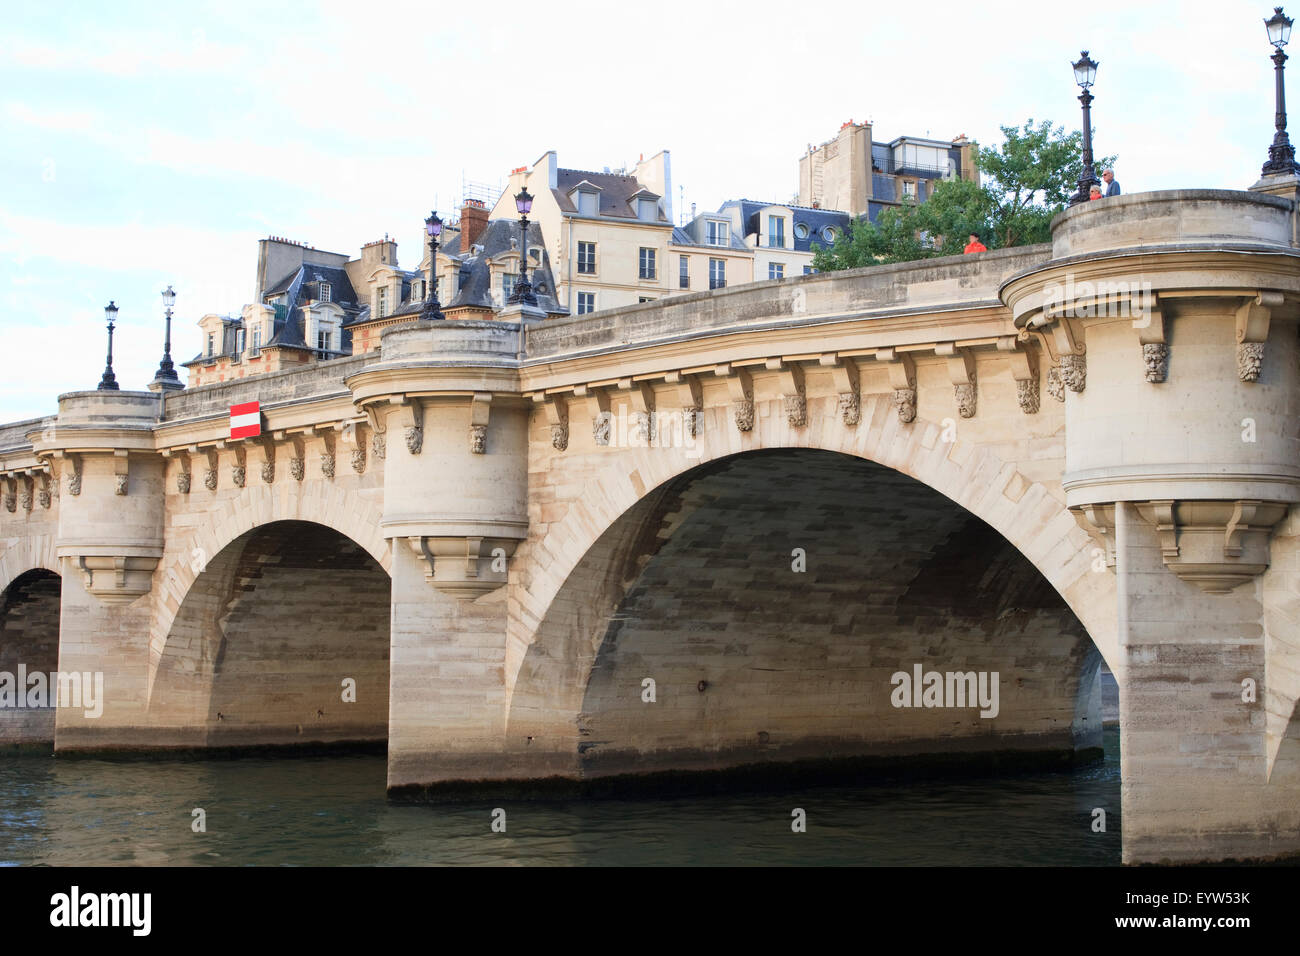 History of the Pont Neuf - The oldest bridge in Paris